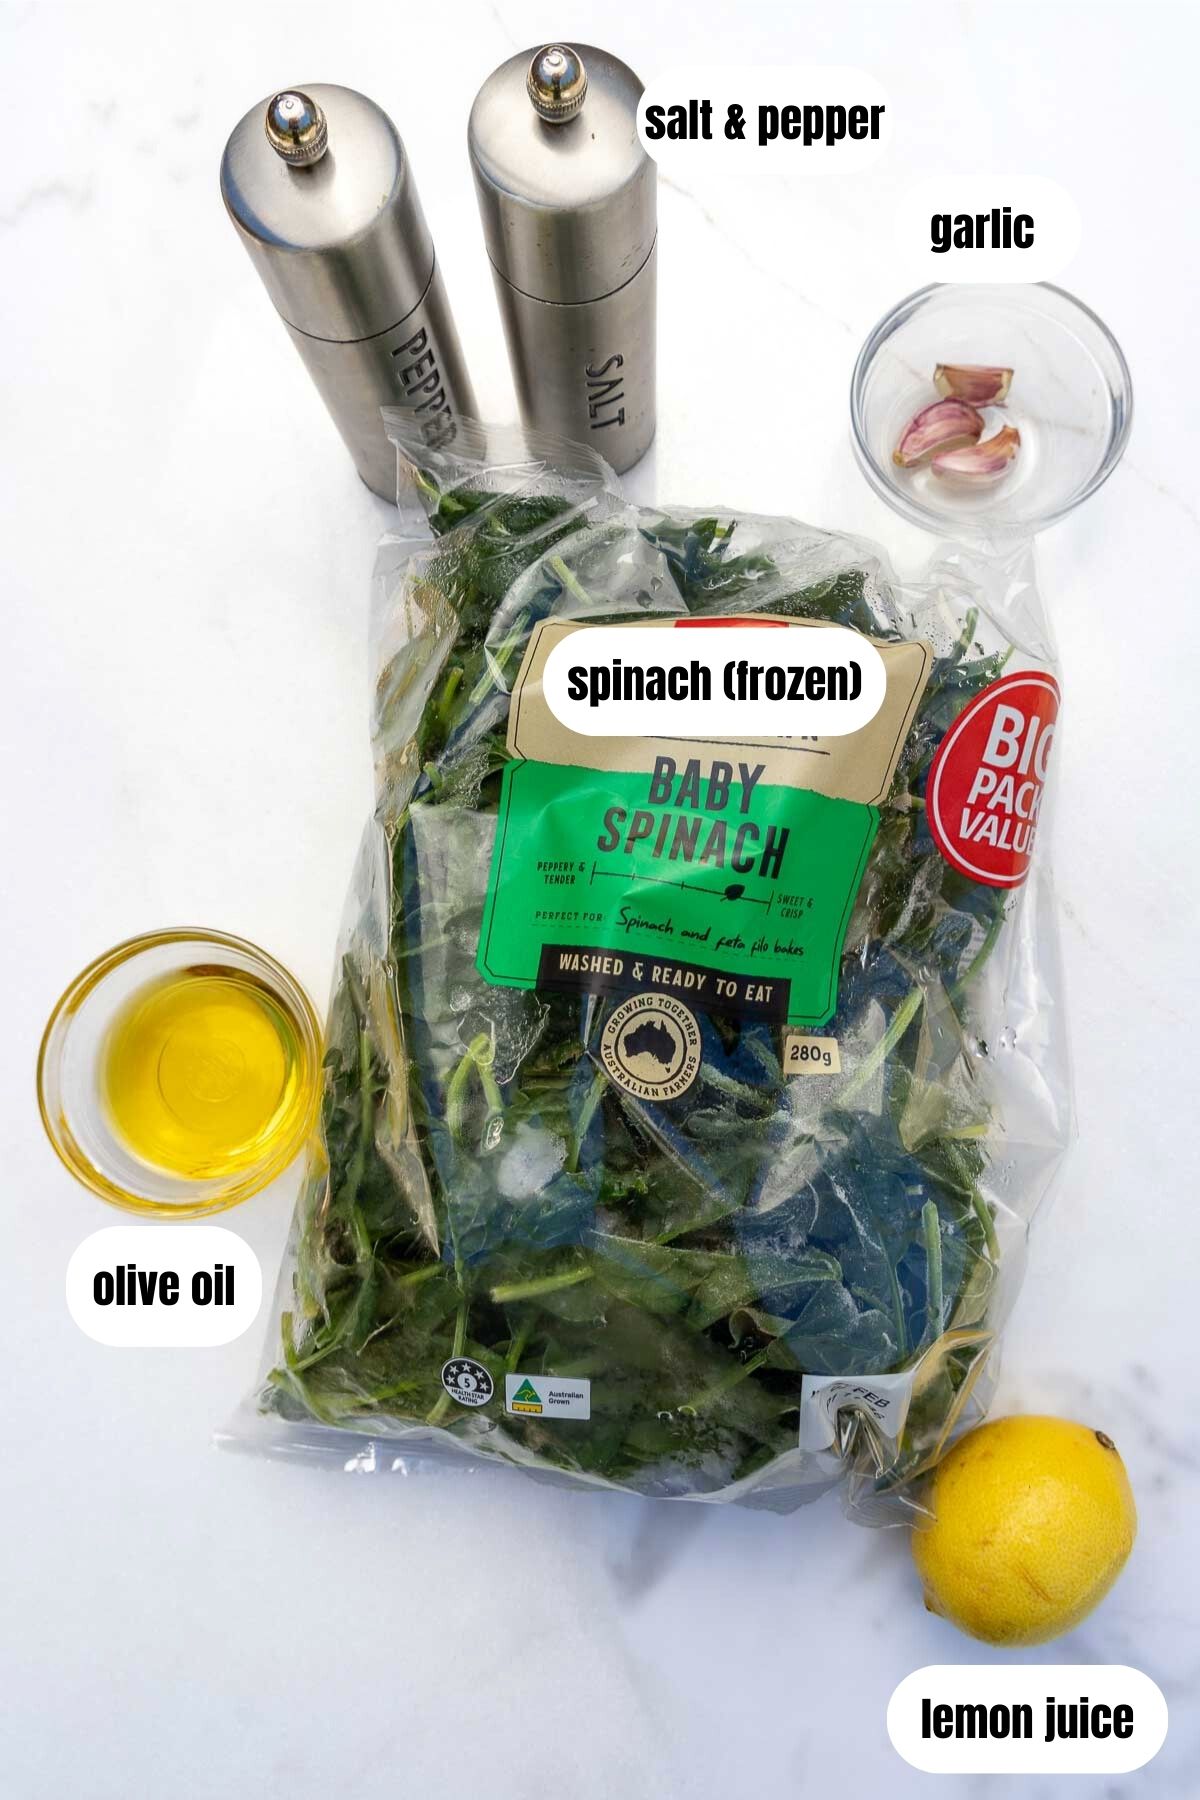 All ingredients for sautéed frozen spinach on a marble background including a big bag of spinach, garlic cloves, a lemon, olive oil and salt and pepper.